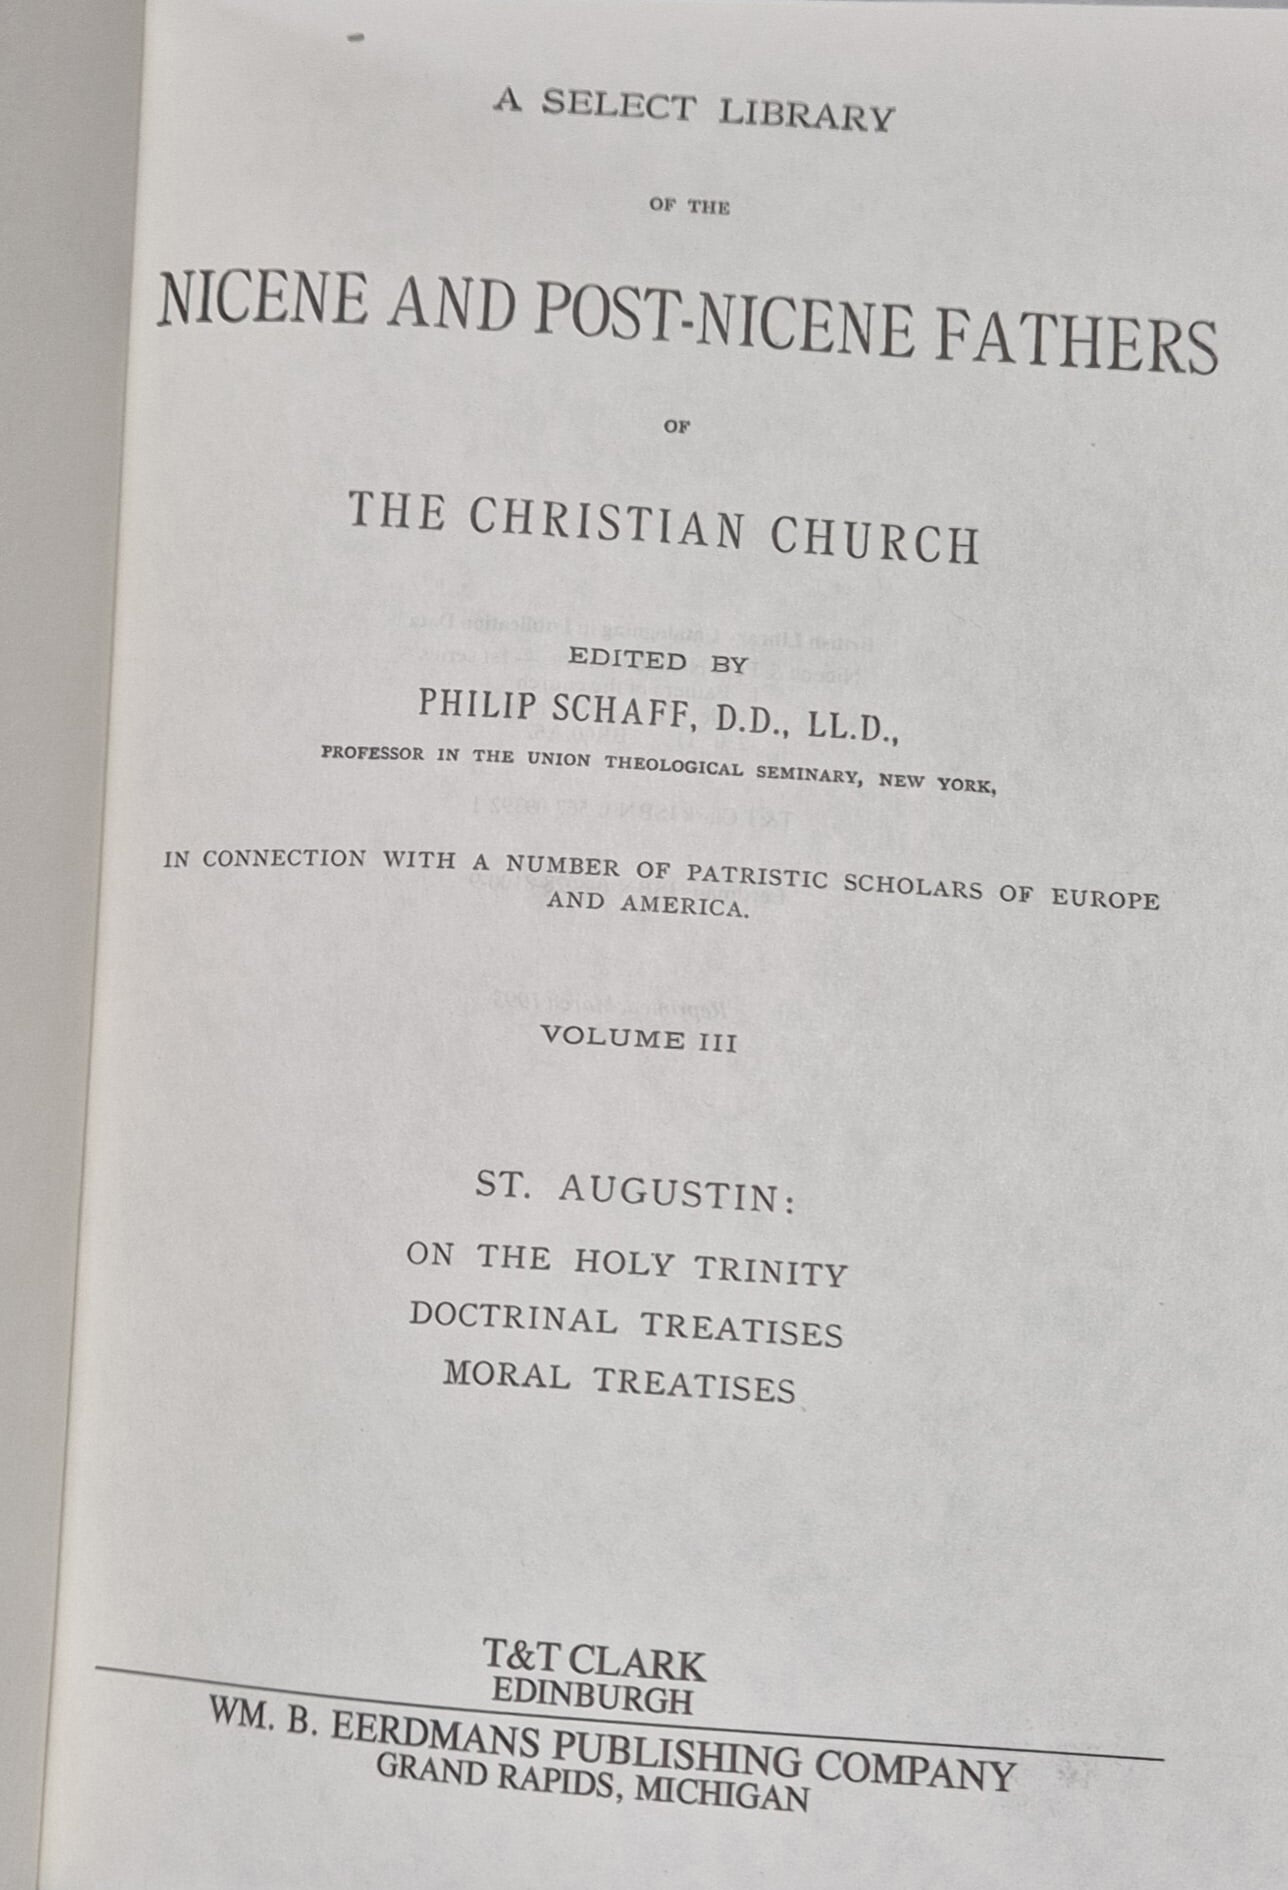 Nicene and Post-Nicene Fathers of the Christian Church - Vol.III  ST. Augustine: On the Holy Trinity, Doctrinal Treatises, Moral Treatises(First Series)